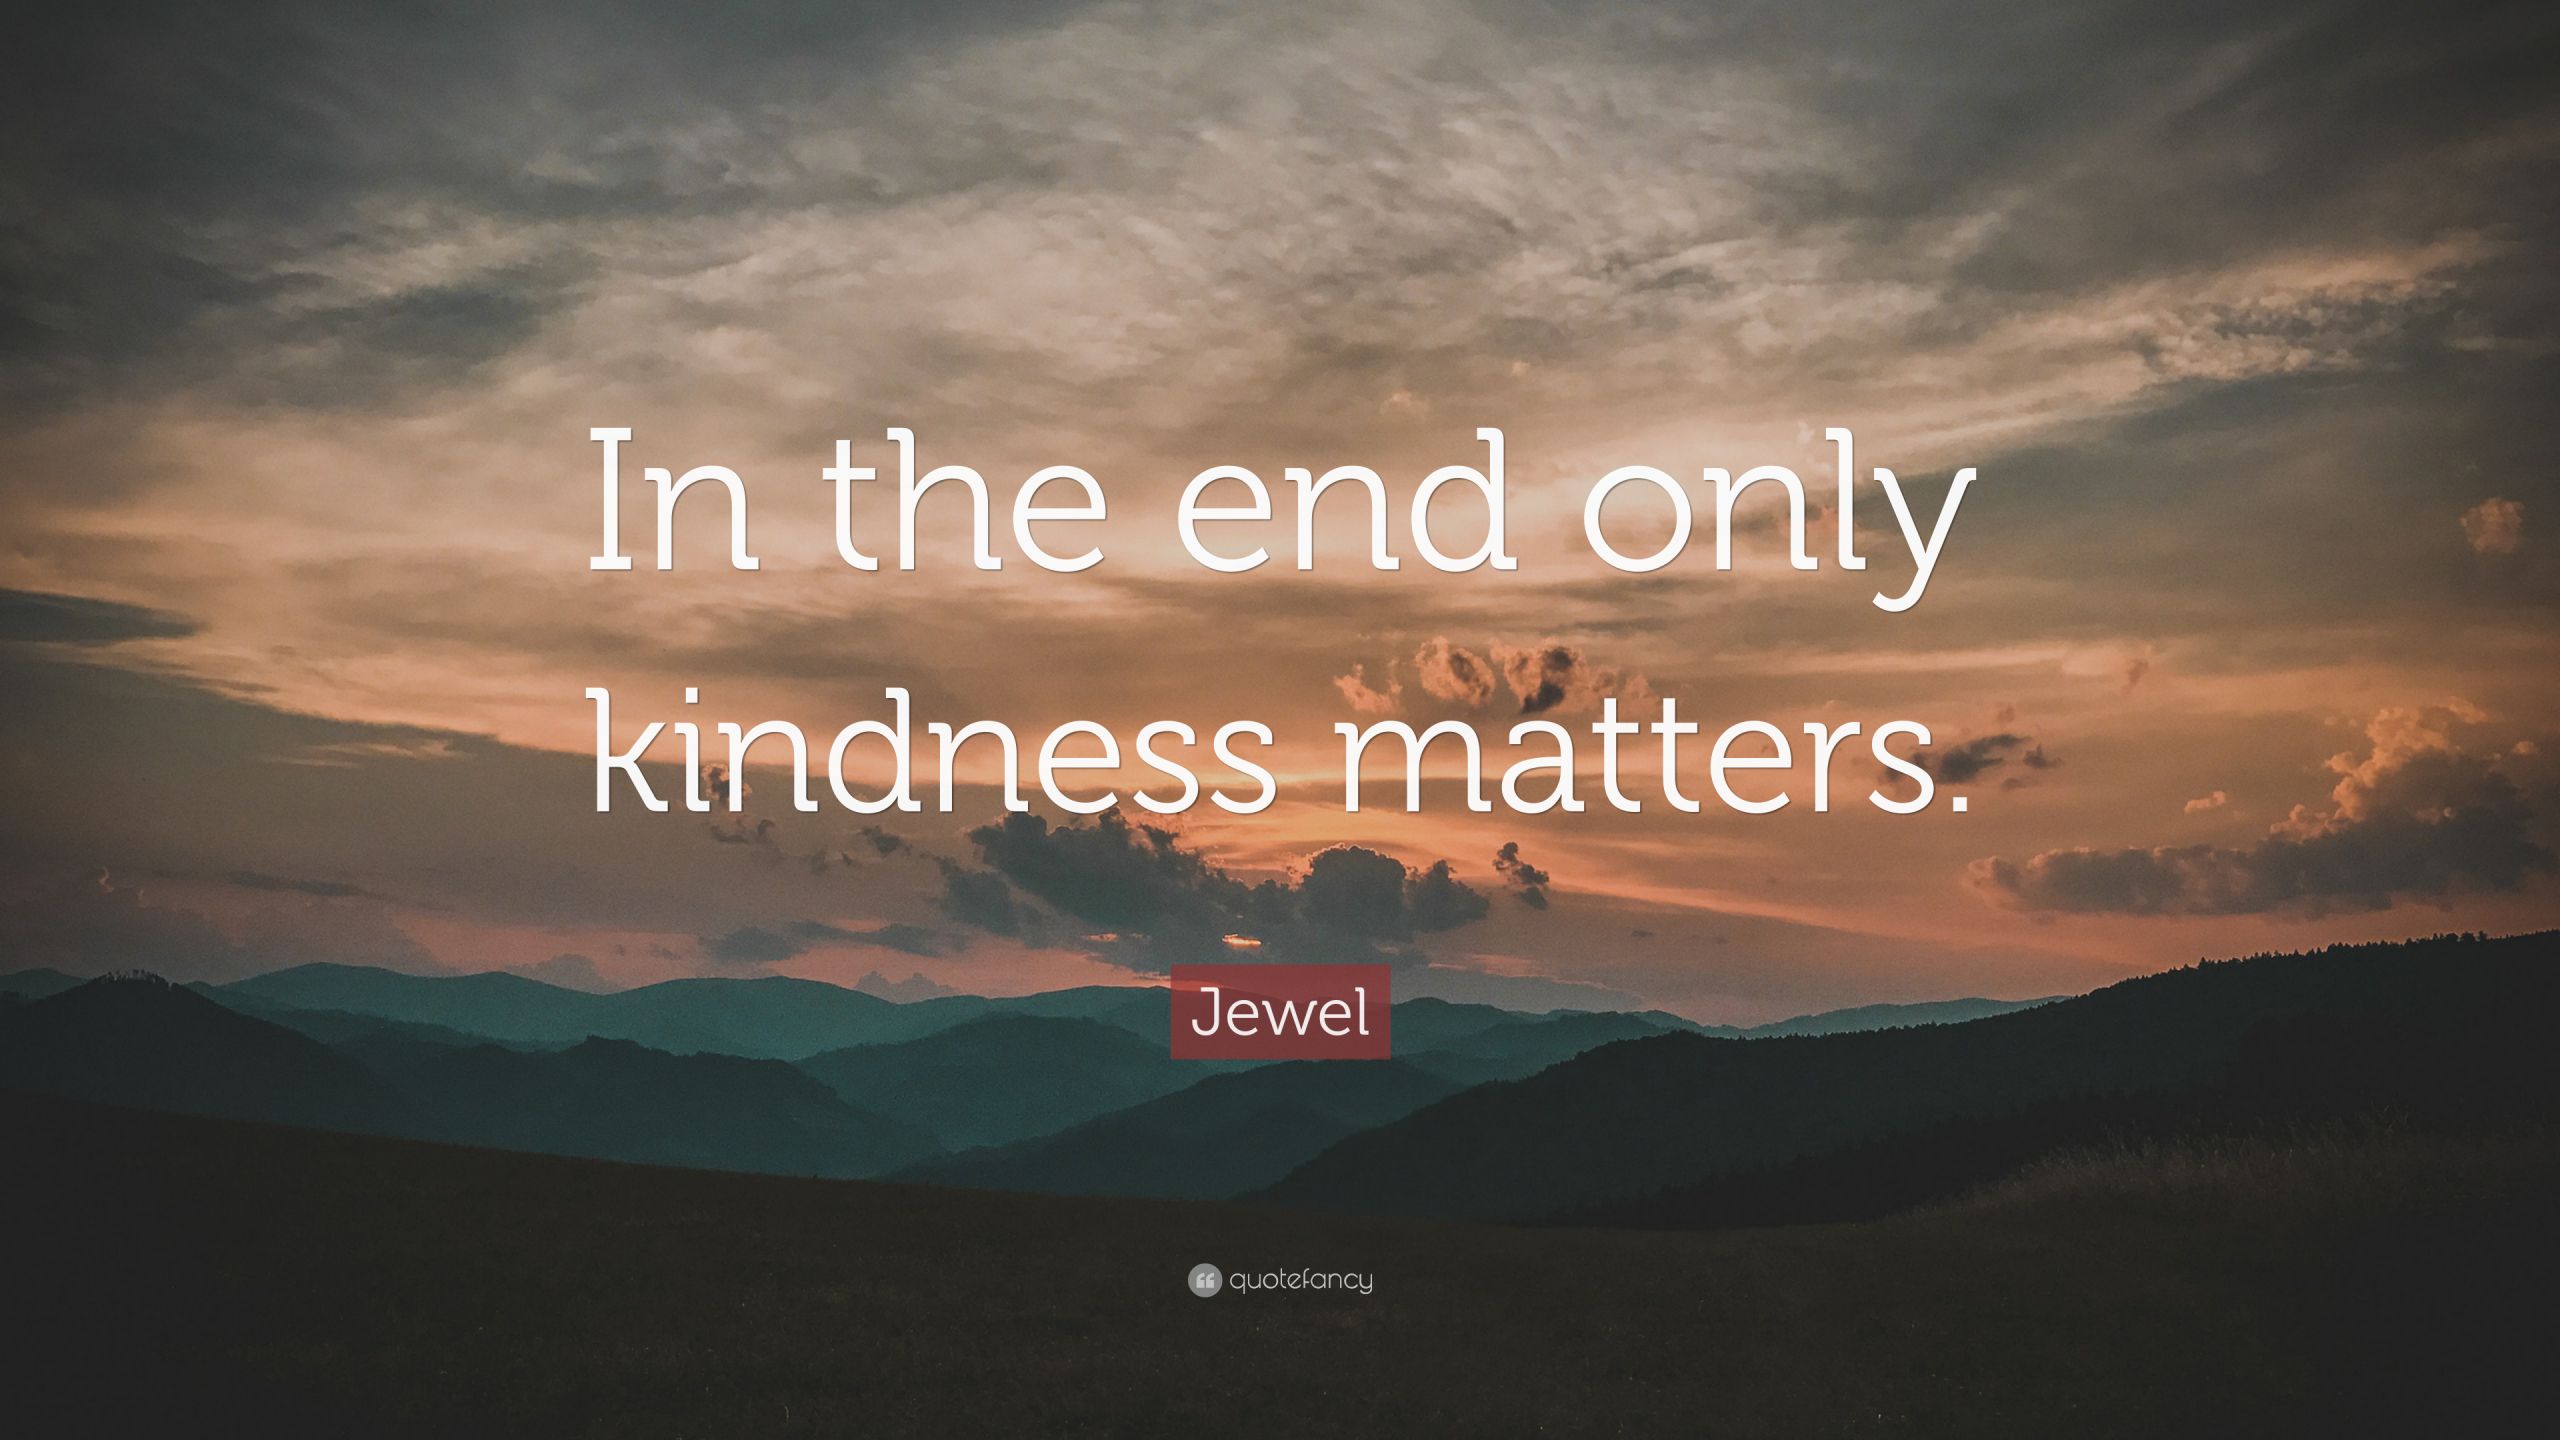 Kindness Matters Quotes
 Jewel Quote “In the end only kindness matters ” 12